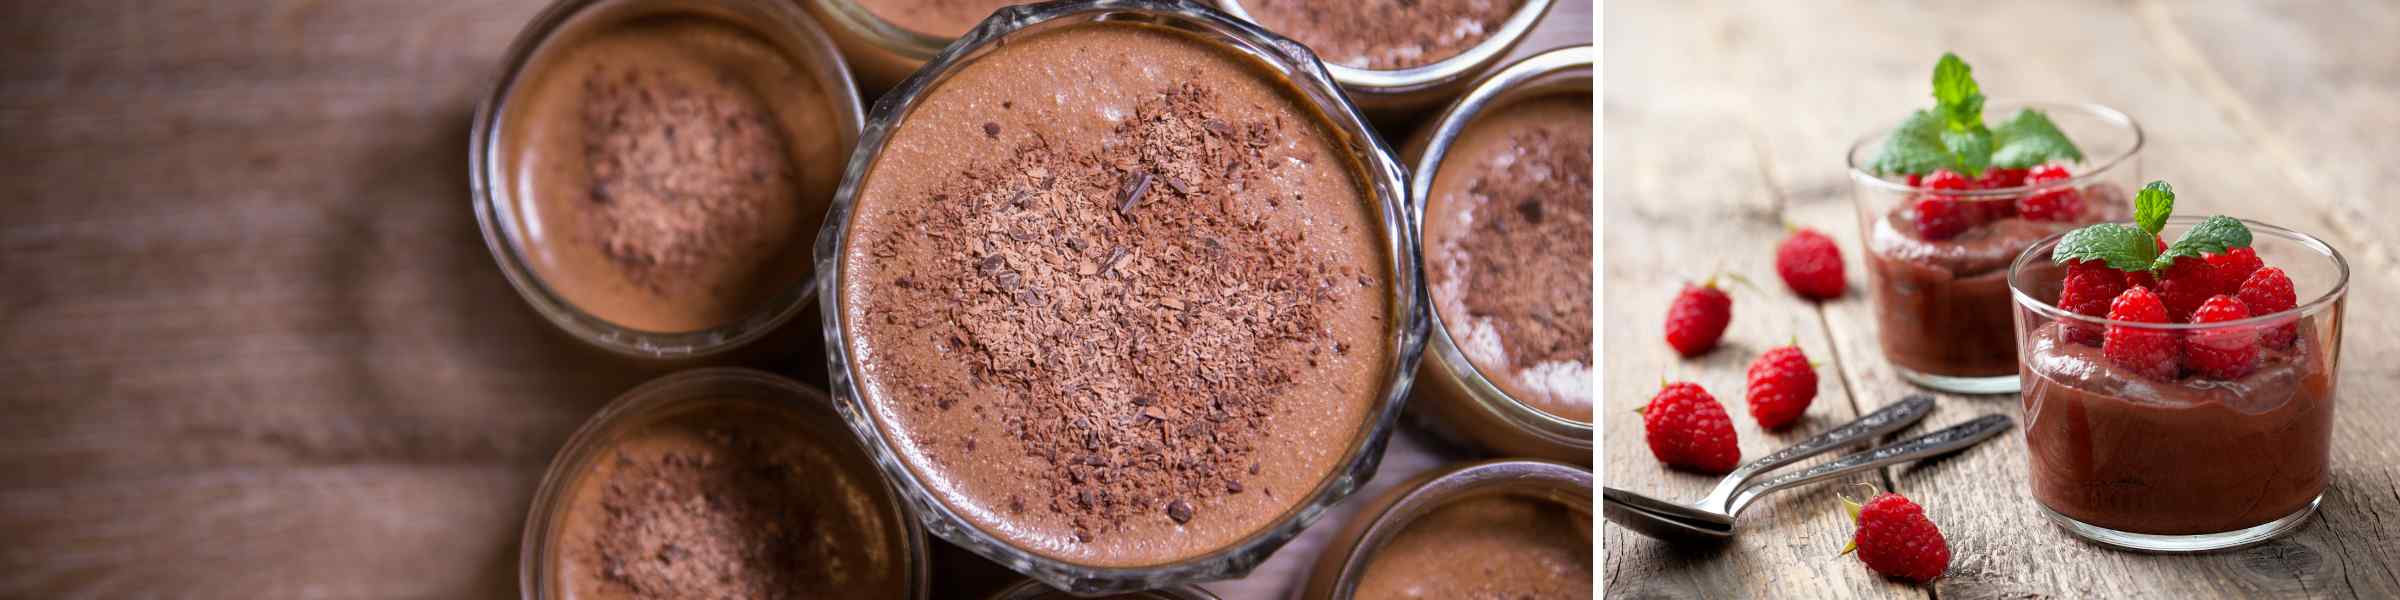 Vegan Chocolate and Date Seed Coffee Mousse Recipe